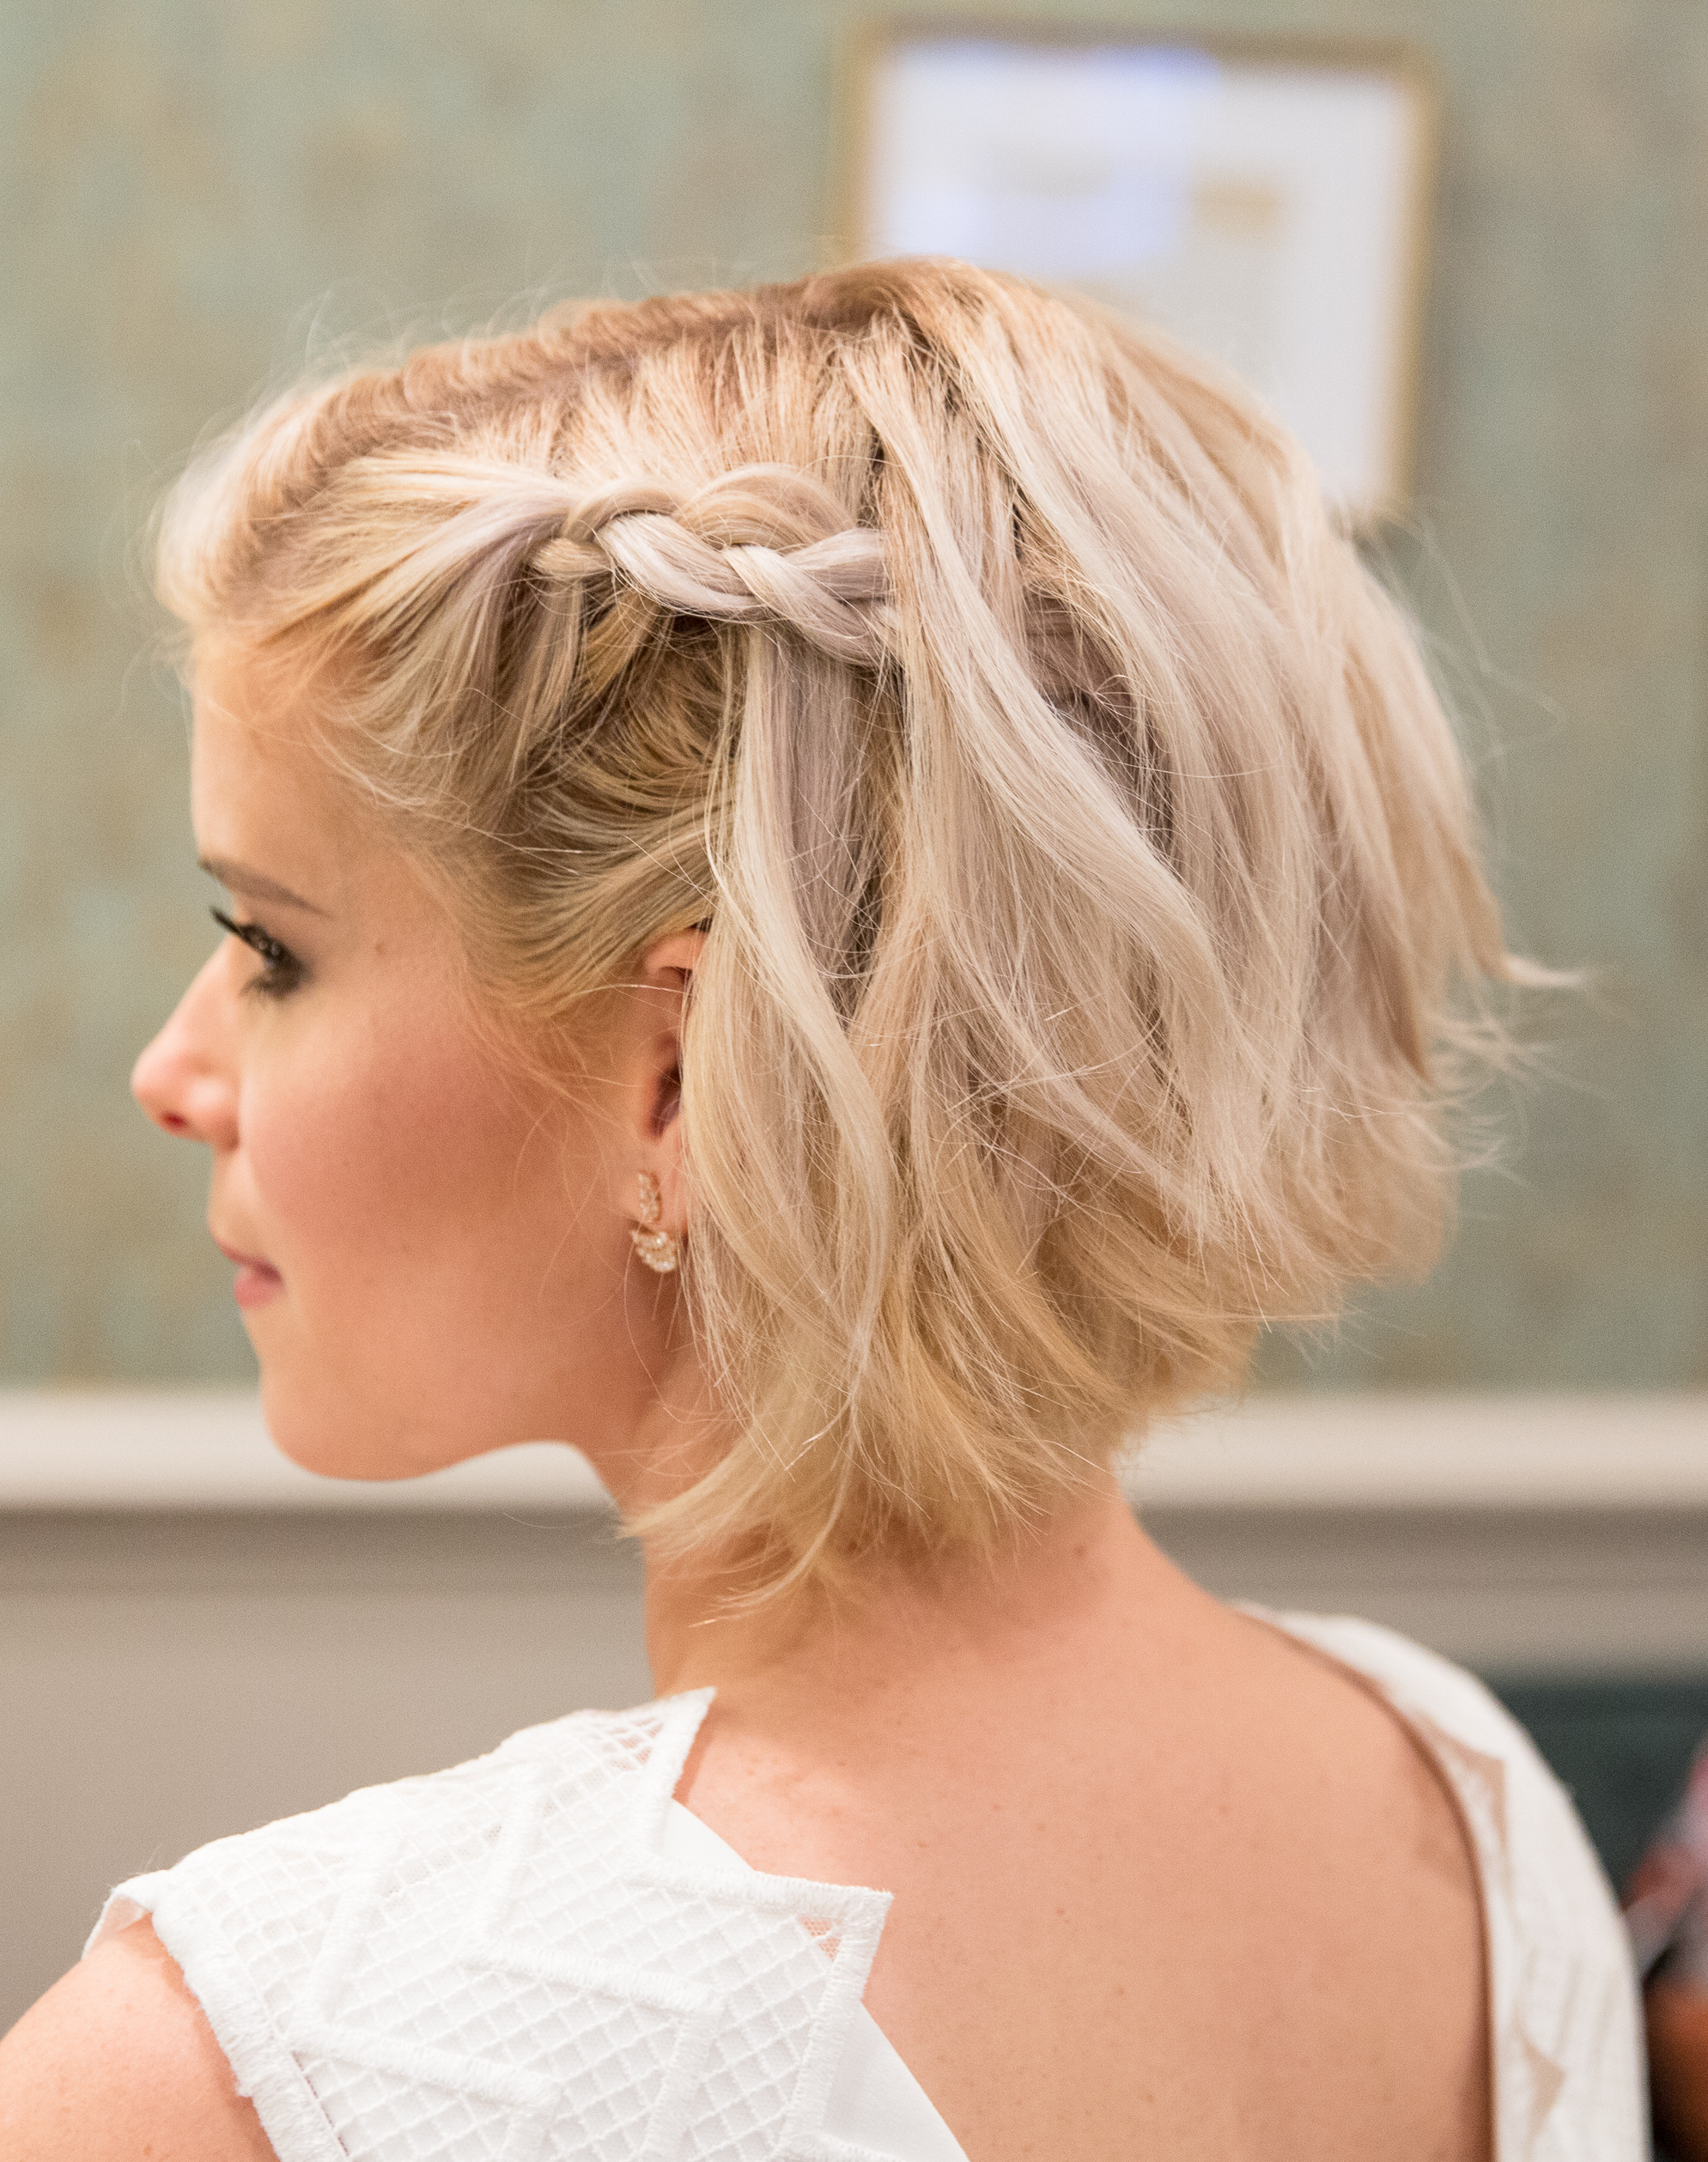 Short Wedding Hairstyles That Are Jaw Dropping - My Sweet Engagement